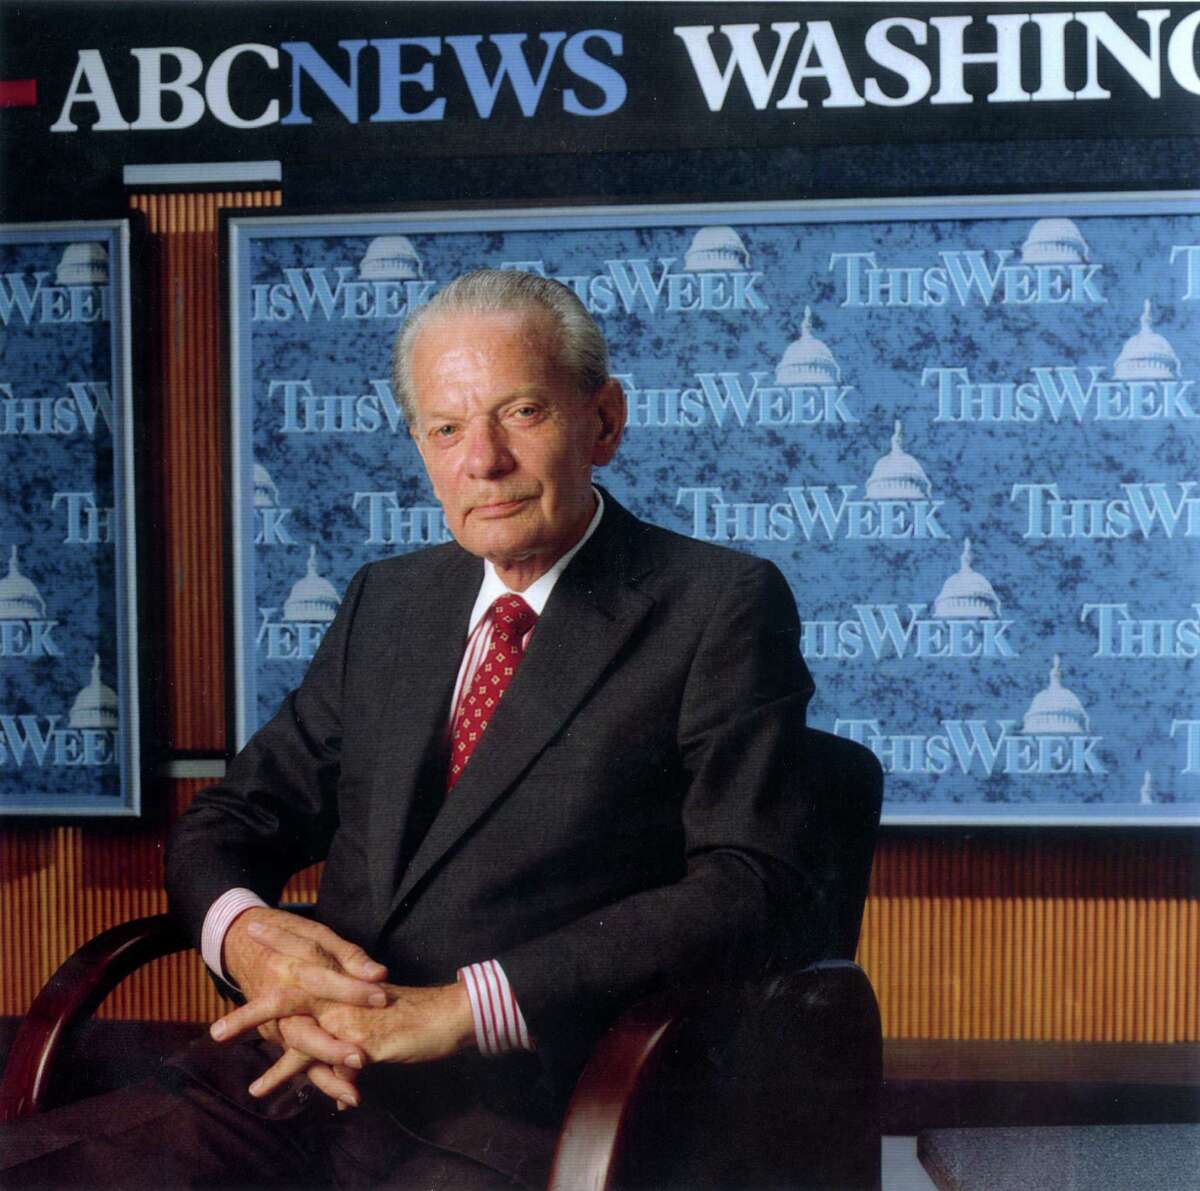 David Brinkley was from a different era, when broadcast journalists were trusted, and news wasn’t viewed through a partisan lens.